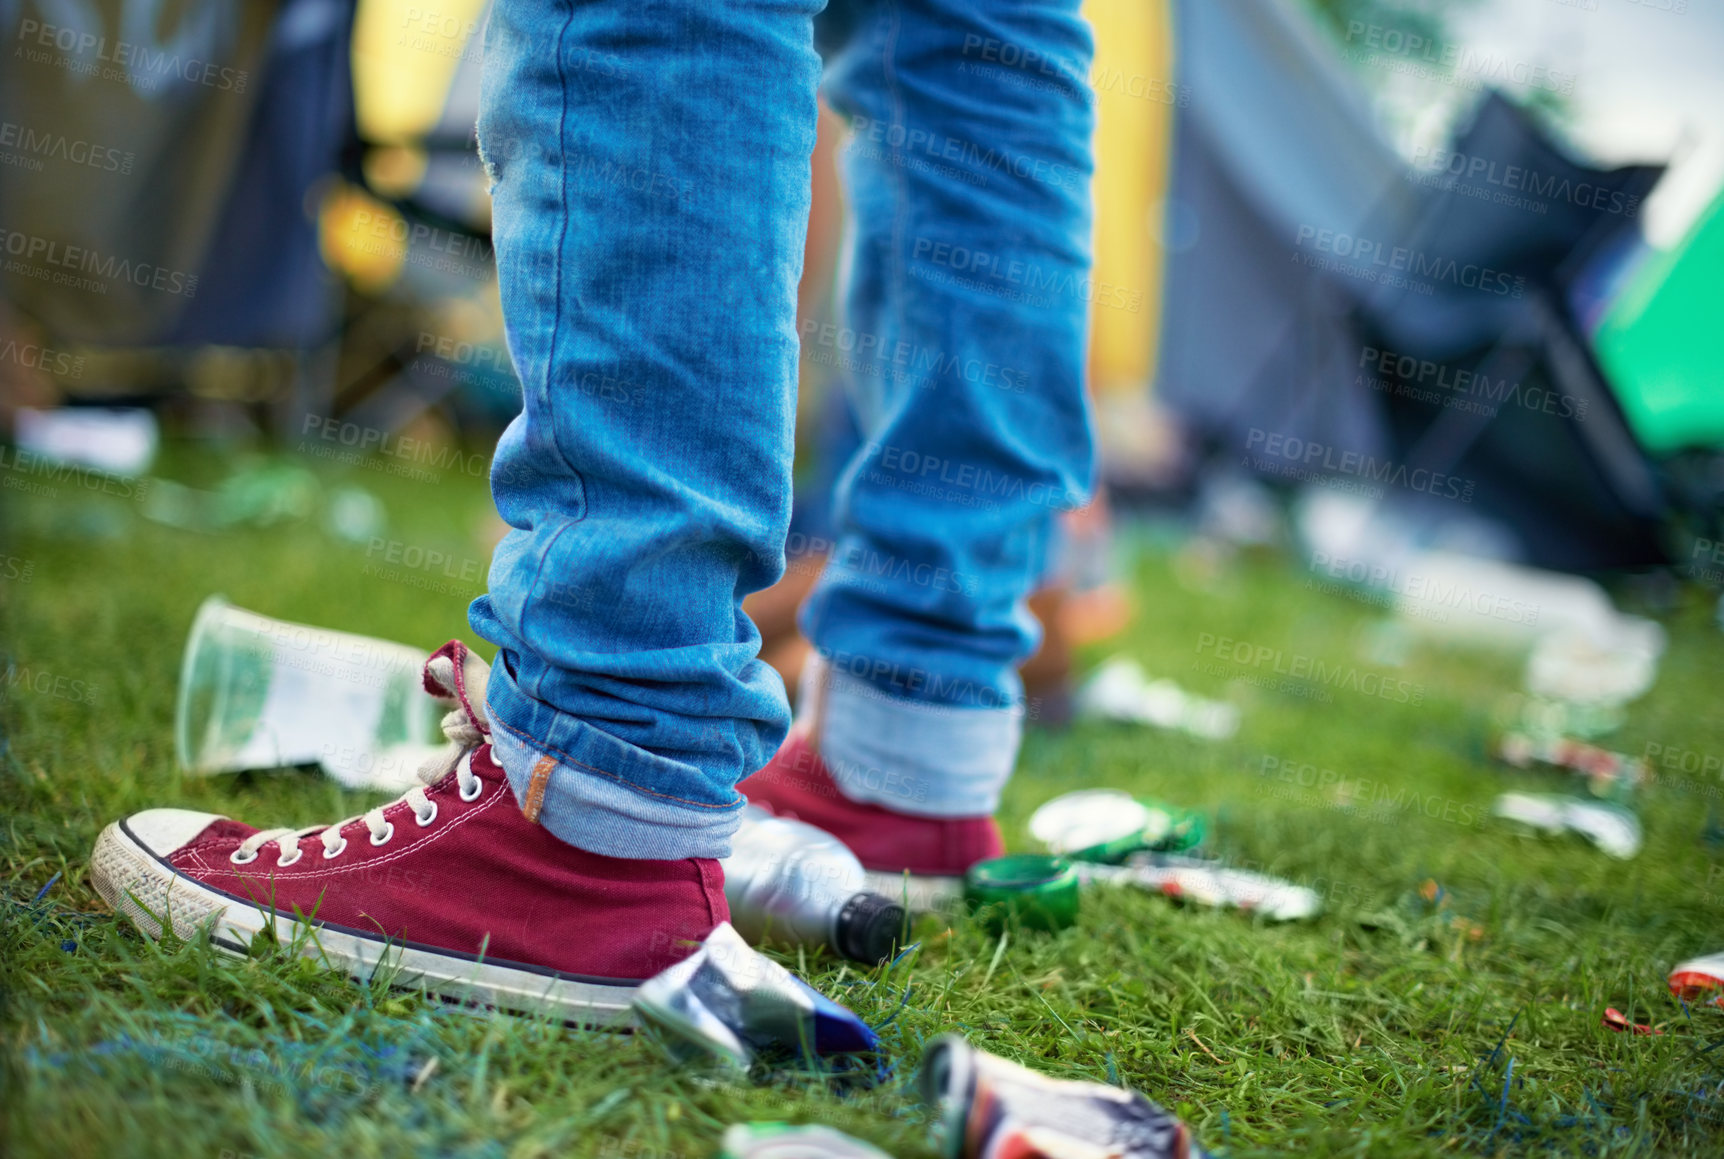 Buy stock photo Feet, event and a person with litter on grass and plastic bottles, cans at an outdoor festival. People at a party,  concert with garbage on a field and shoes with pollution for recycling trash